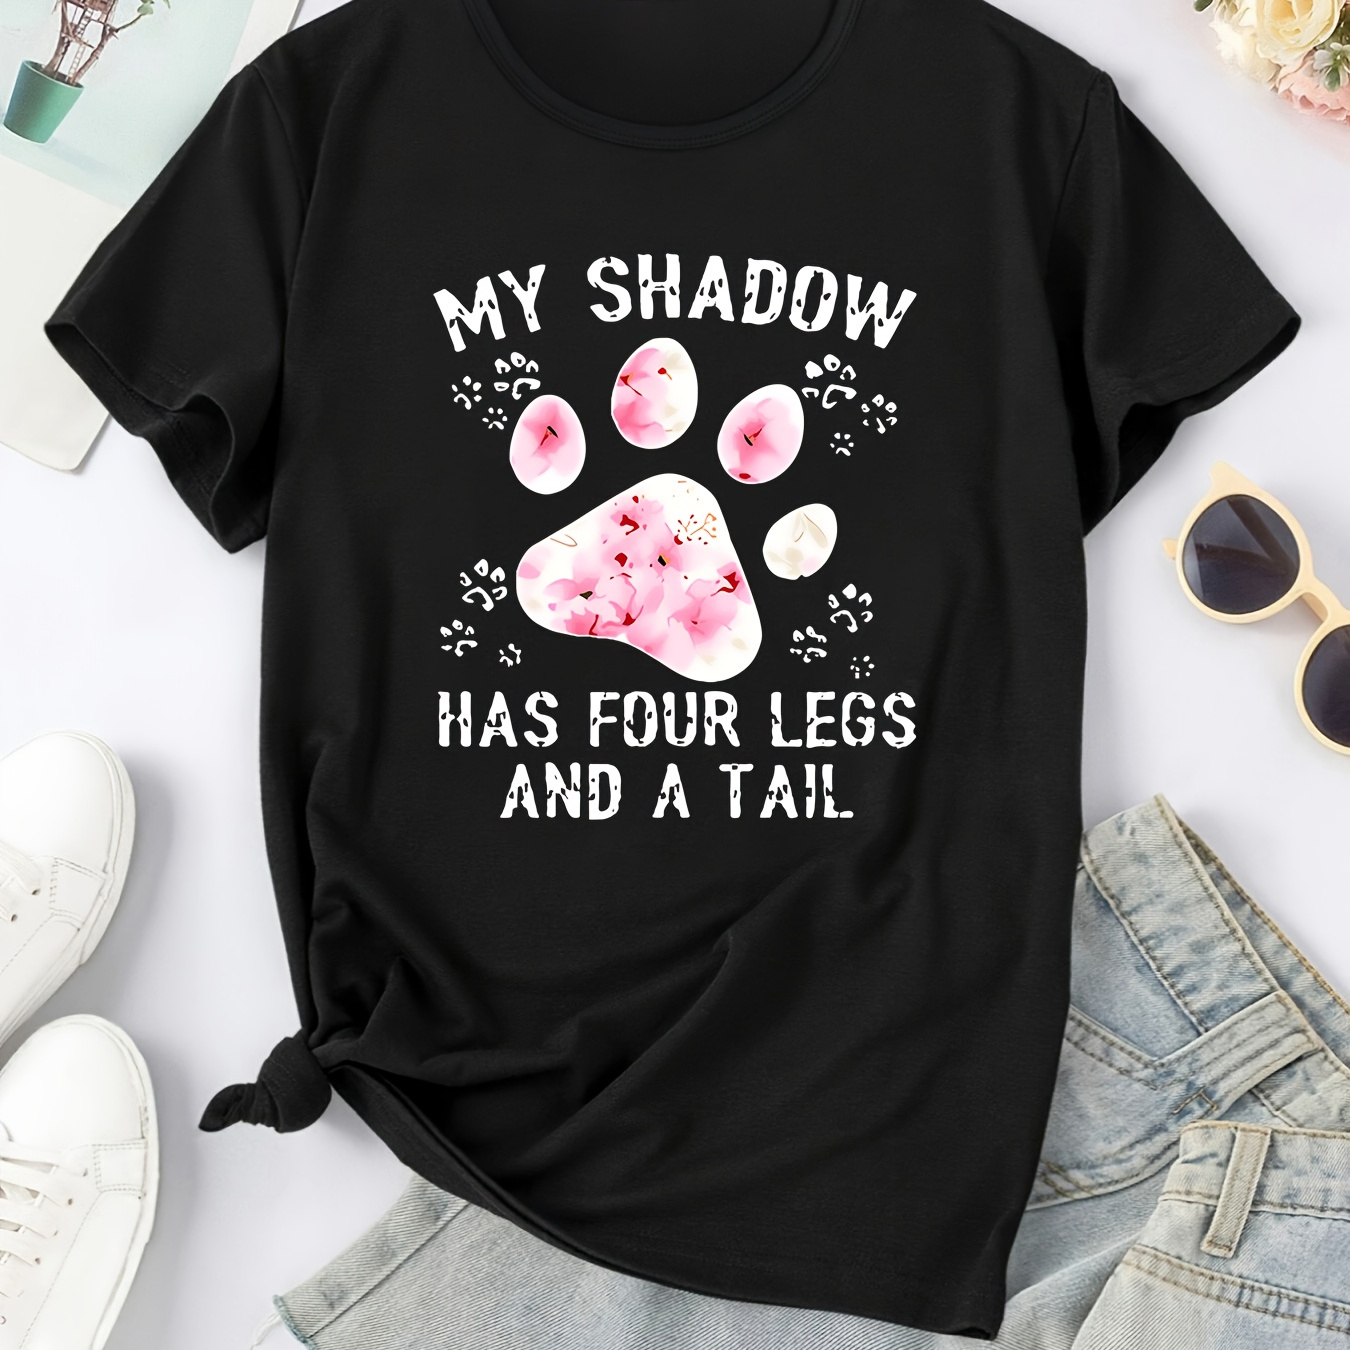 

Women's Short Sleeve Round Neck T-shirt With Cherry Paw Print, Casual Tee With White "my Shadow Has 4 Legs And A Tail" Text, Spring/summer Fashion